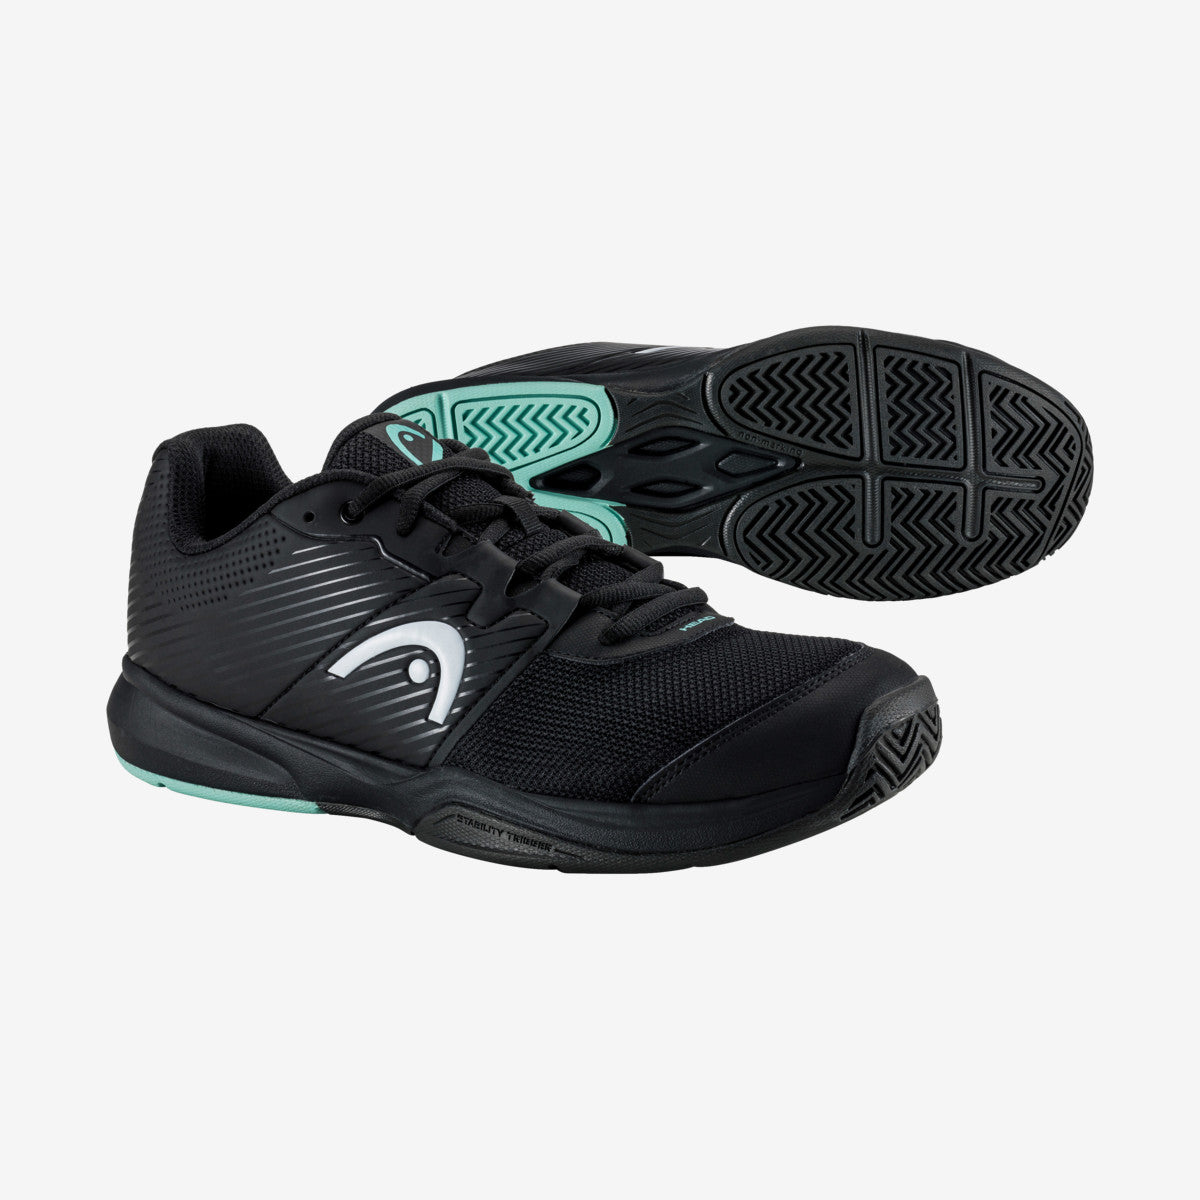 Head Revolt Evo 2.0 Mens Tennis Shoe- BKTE  which is available for sale at GSM Sports